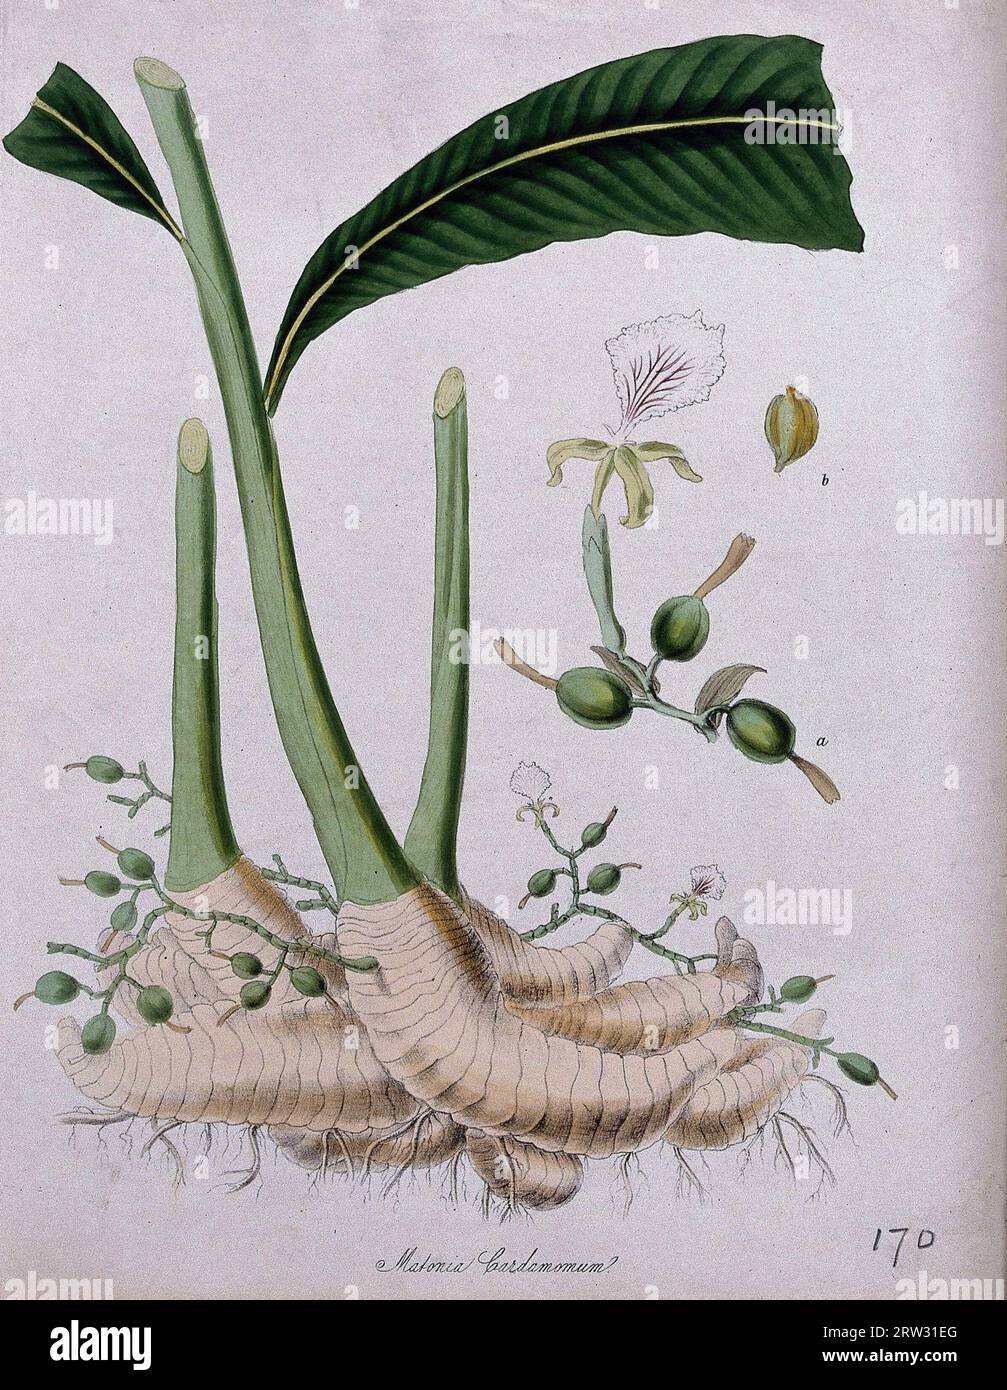 Cardamom plant(Elettaria cardamomum), rootstock sprouting leafy and flowering stems, and separate flower. Coloured lithograph after M. A. Burnett, c.1847. Stock Photo